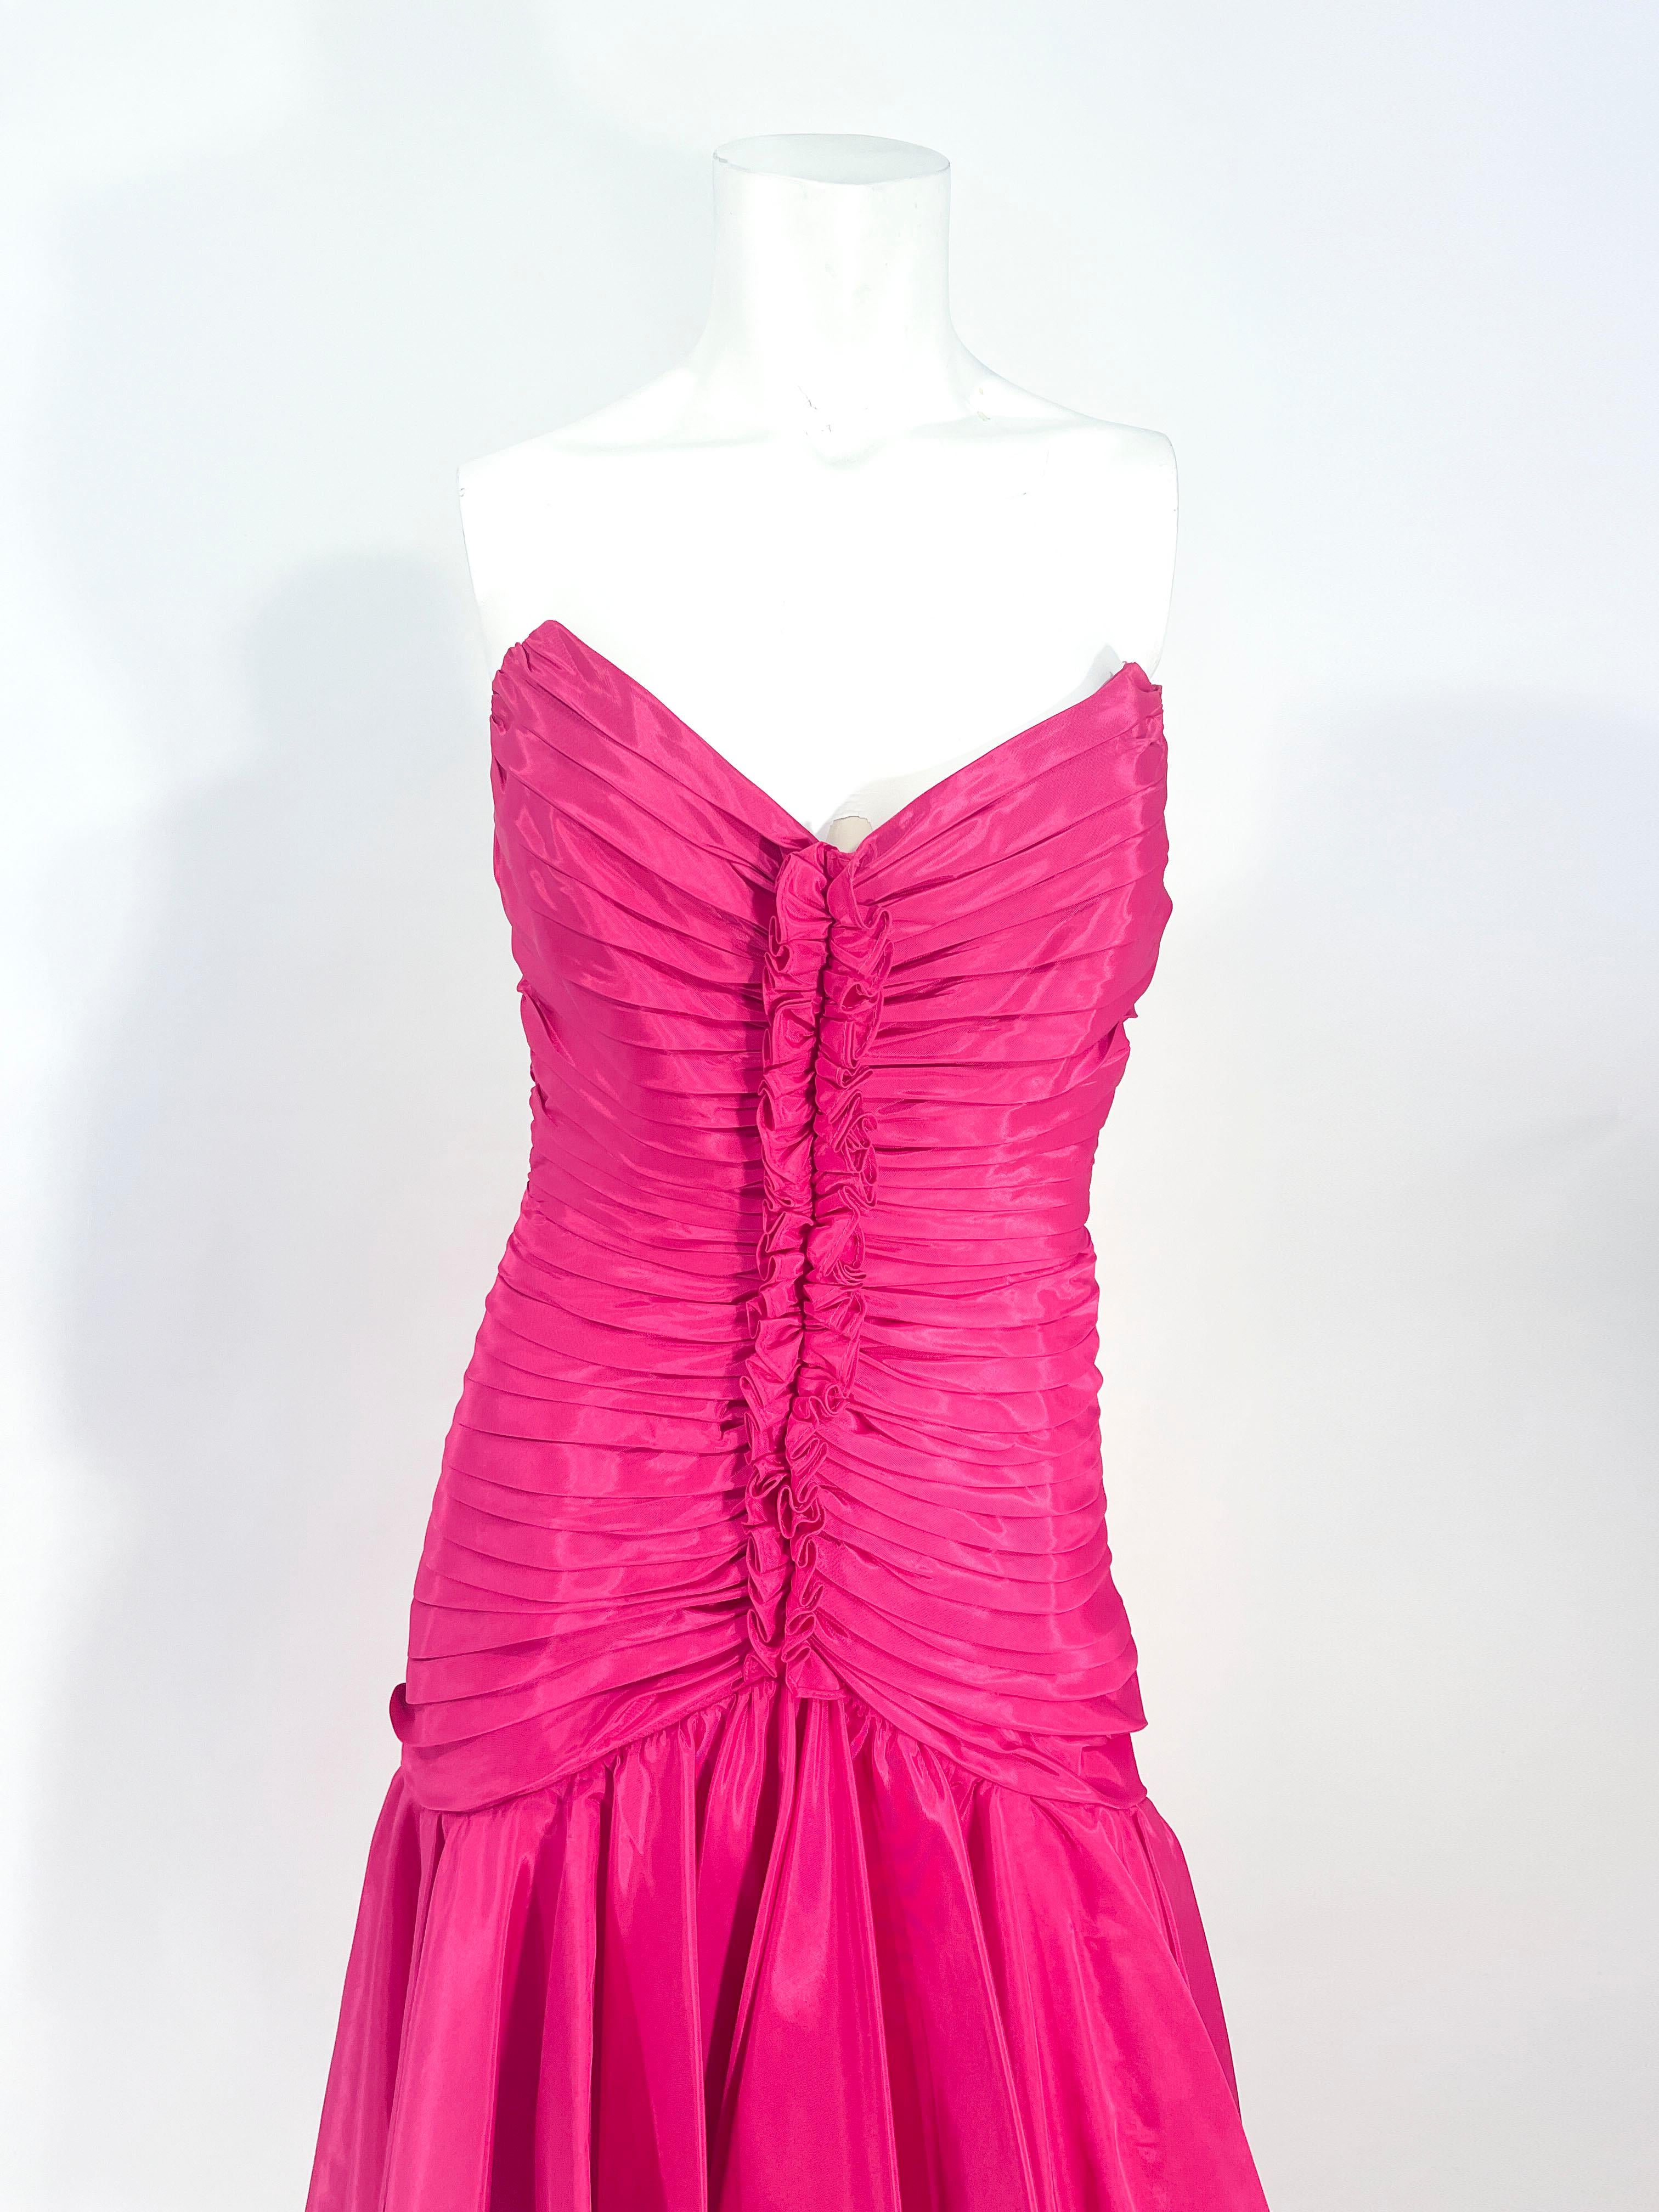 1980s Tadashi hot pink cocktail dress featuring a strapless/sleeveless neckline, pleated and ruching coming to a central vertical ruffle. The ruching and pleating go down past the hipline and open up to the high-low layered taffeta over chiffon